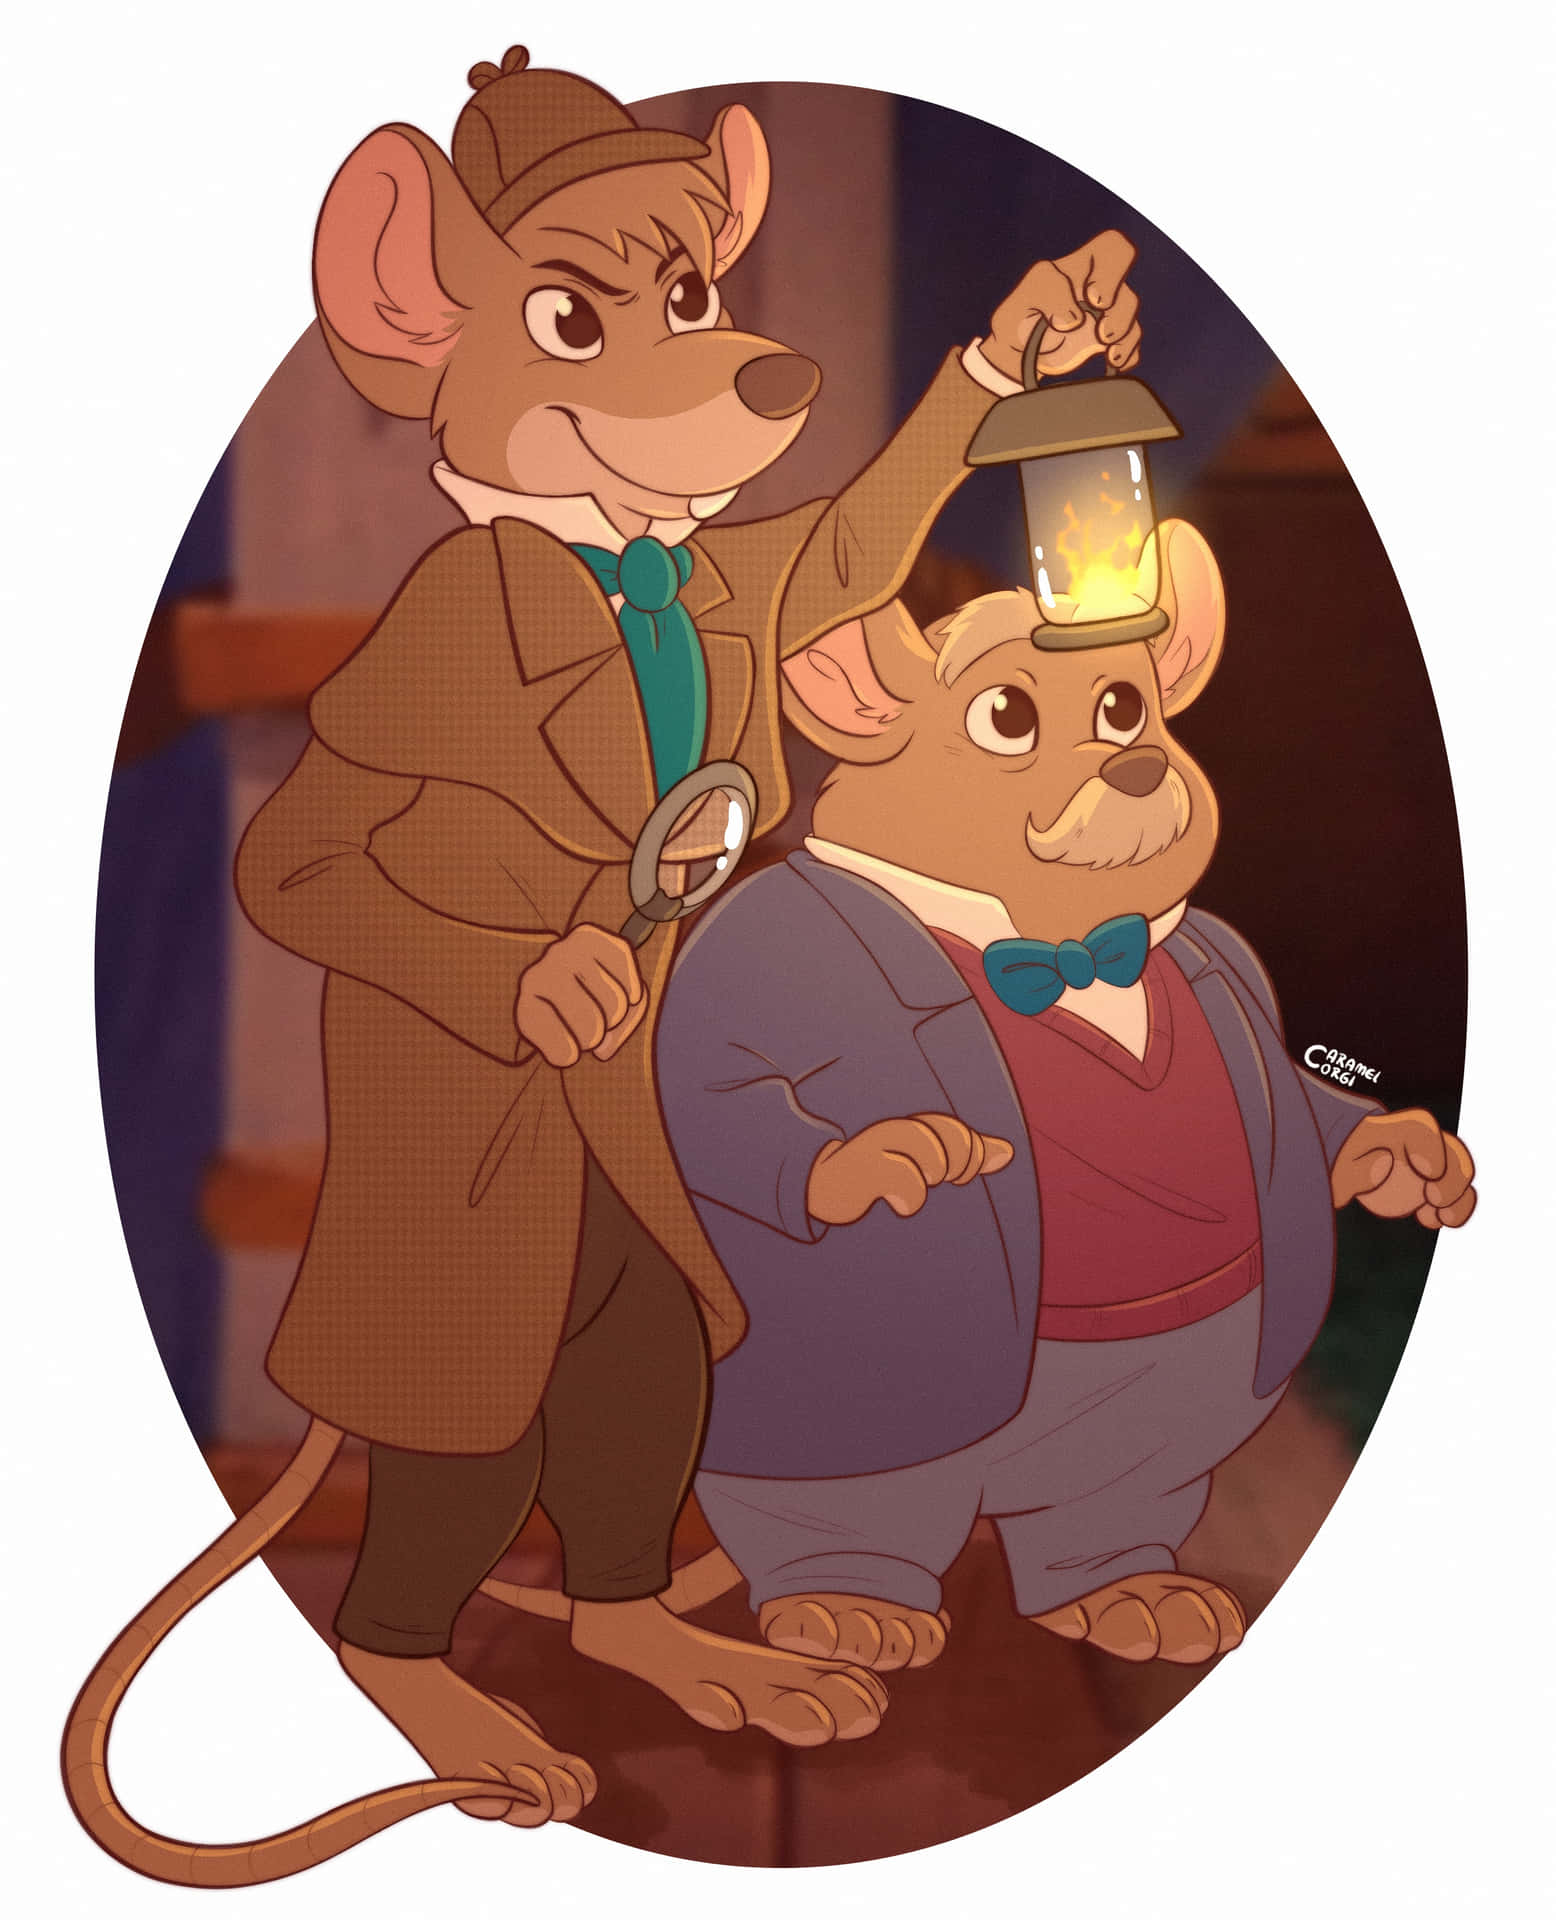 Basil of Baker Street and Dr. Dawson in The Great Mouse Detective Wallpaper